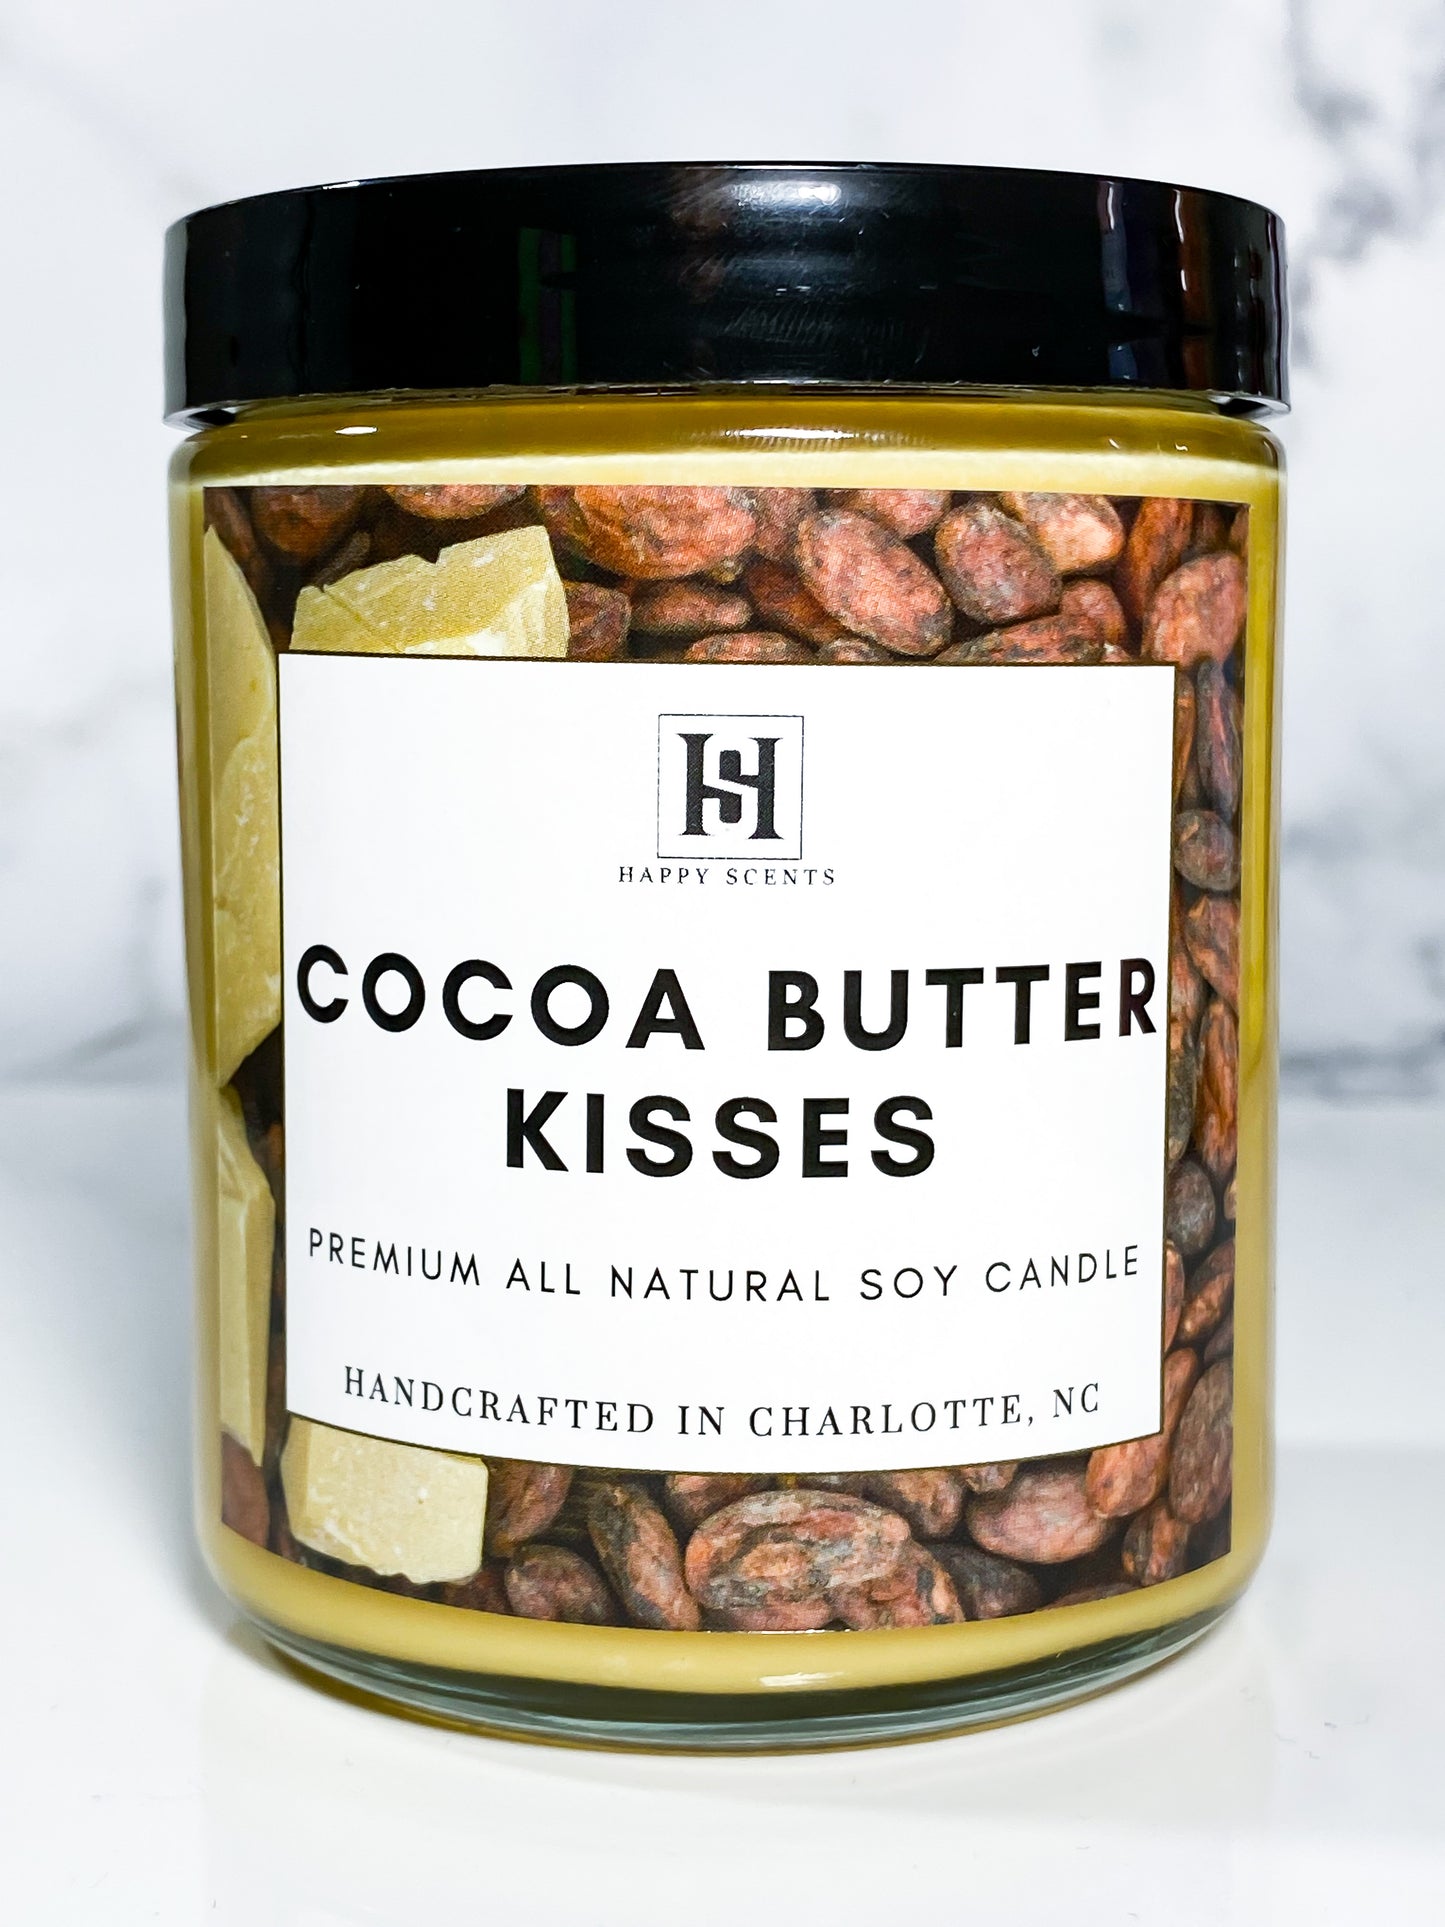 Cocoa Butter Kisses Jar Candle